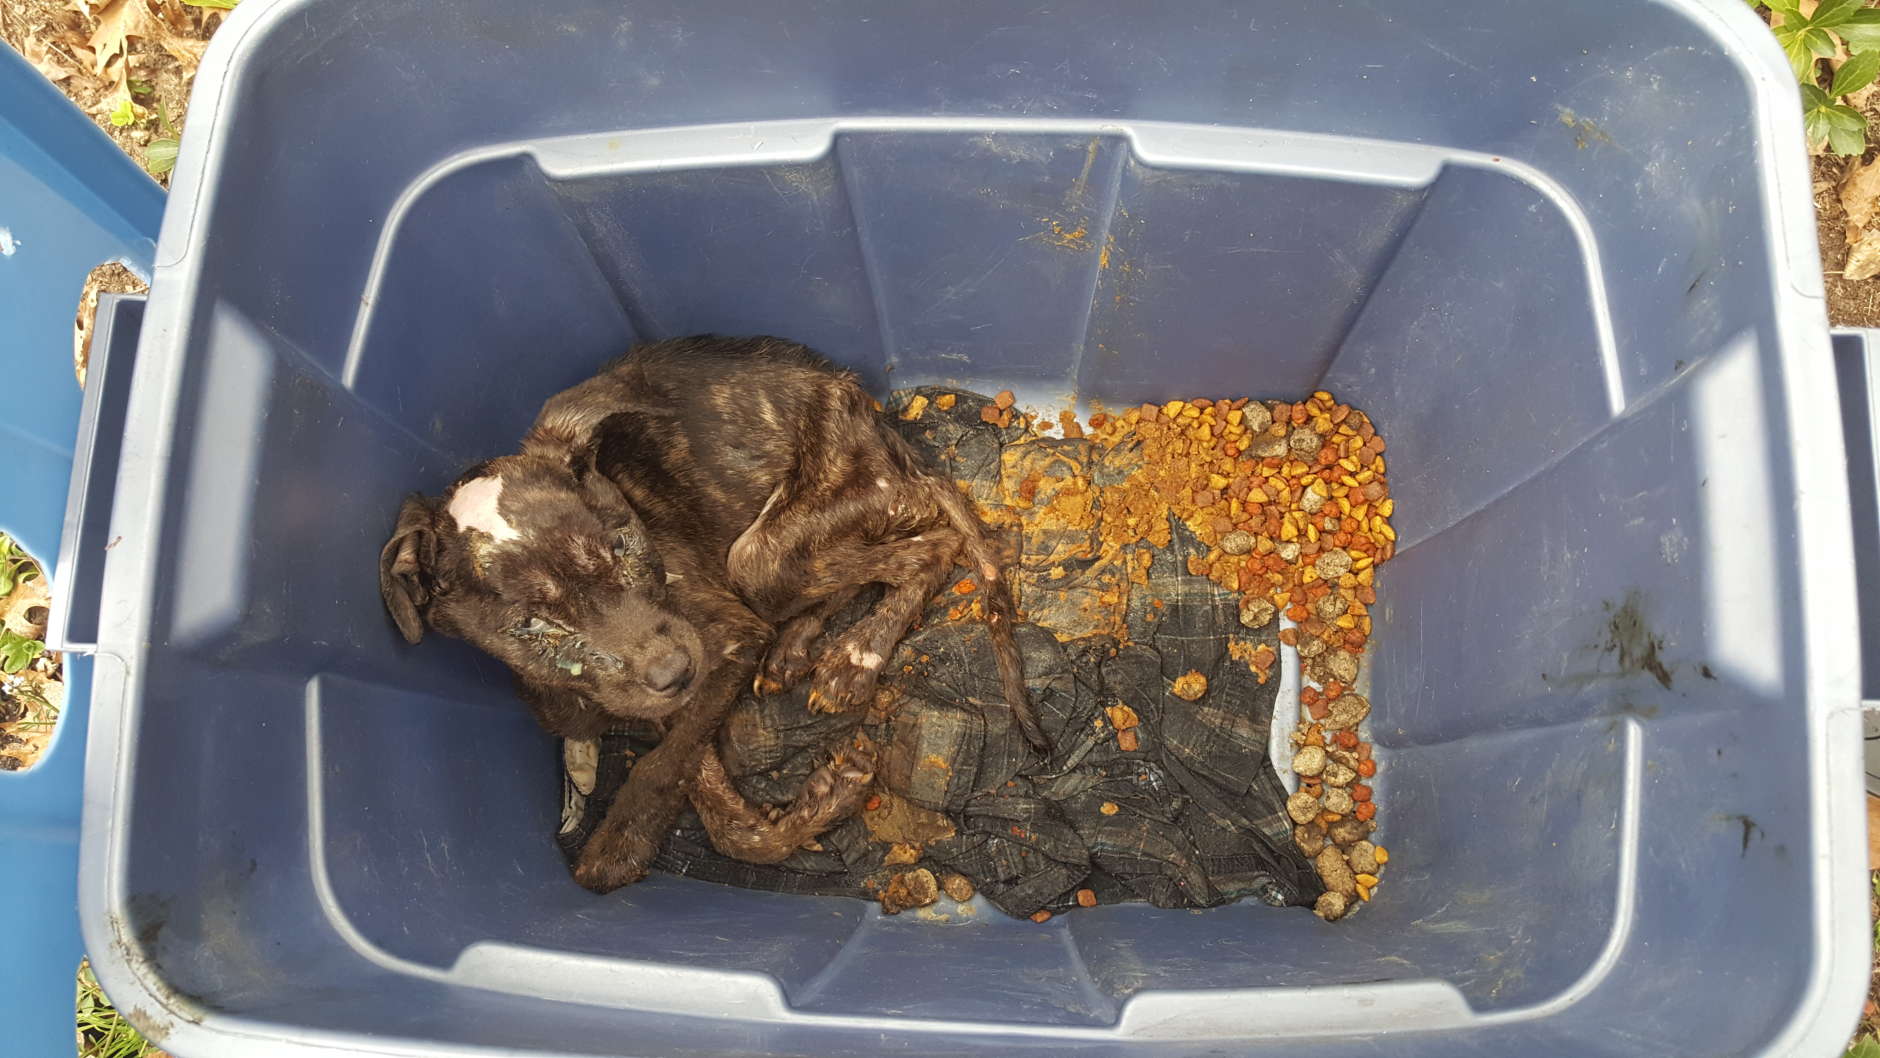 Veterinarians said the puppy, believed to be a brindle pit bull, was extremely malnourished, covered in urine and feces, was missing fur and had open wounds. (Courtesy of Howard County Police Department)